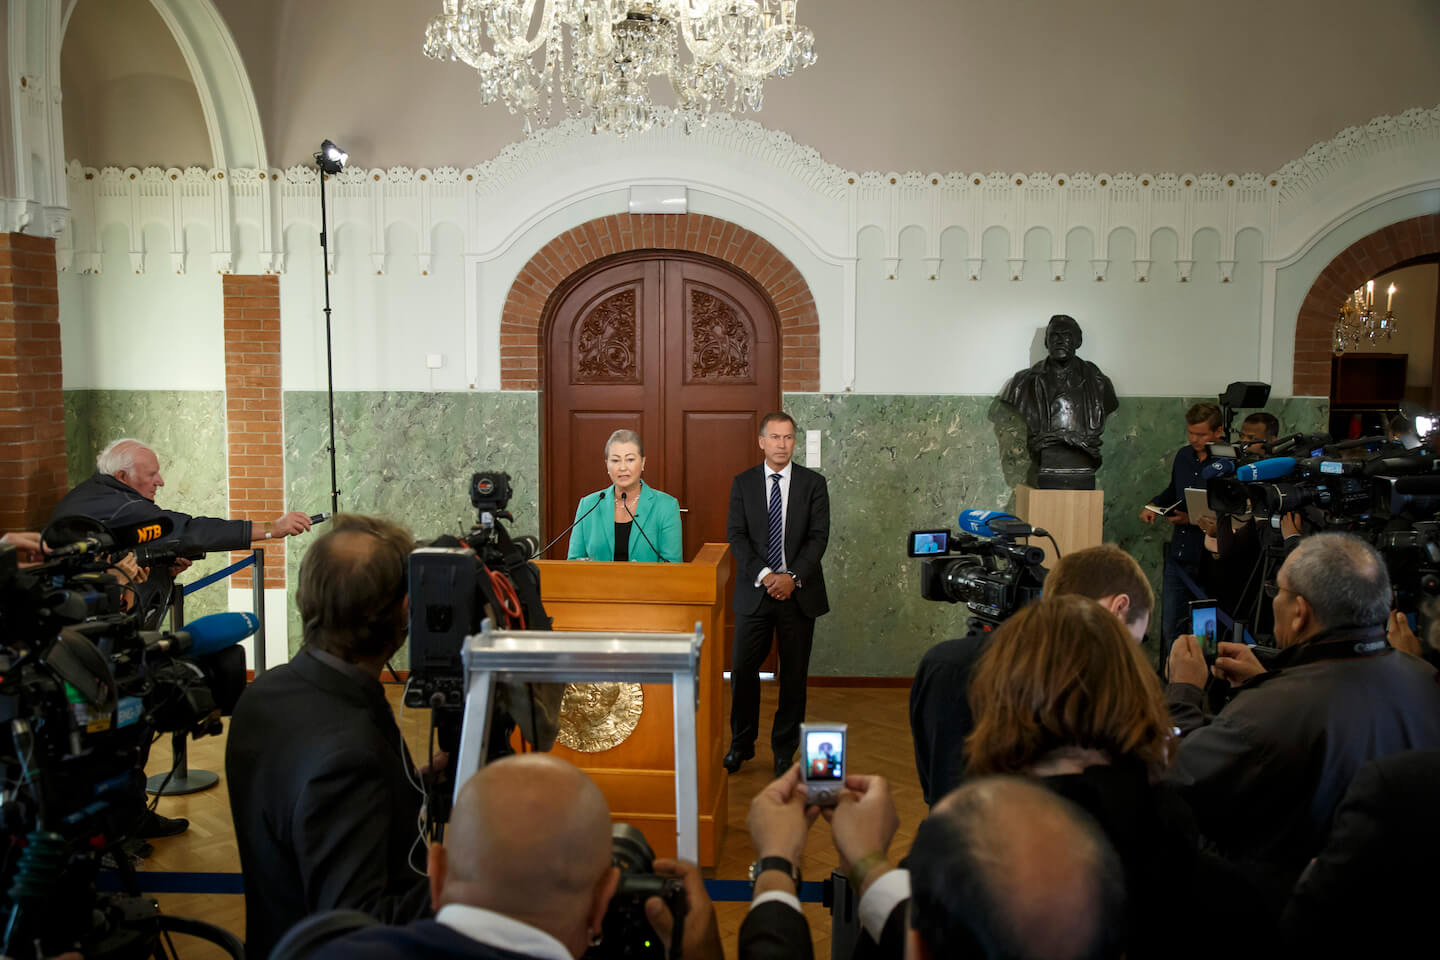 Image of the Nobel Peace Prize being announced in Norway.